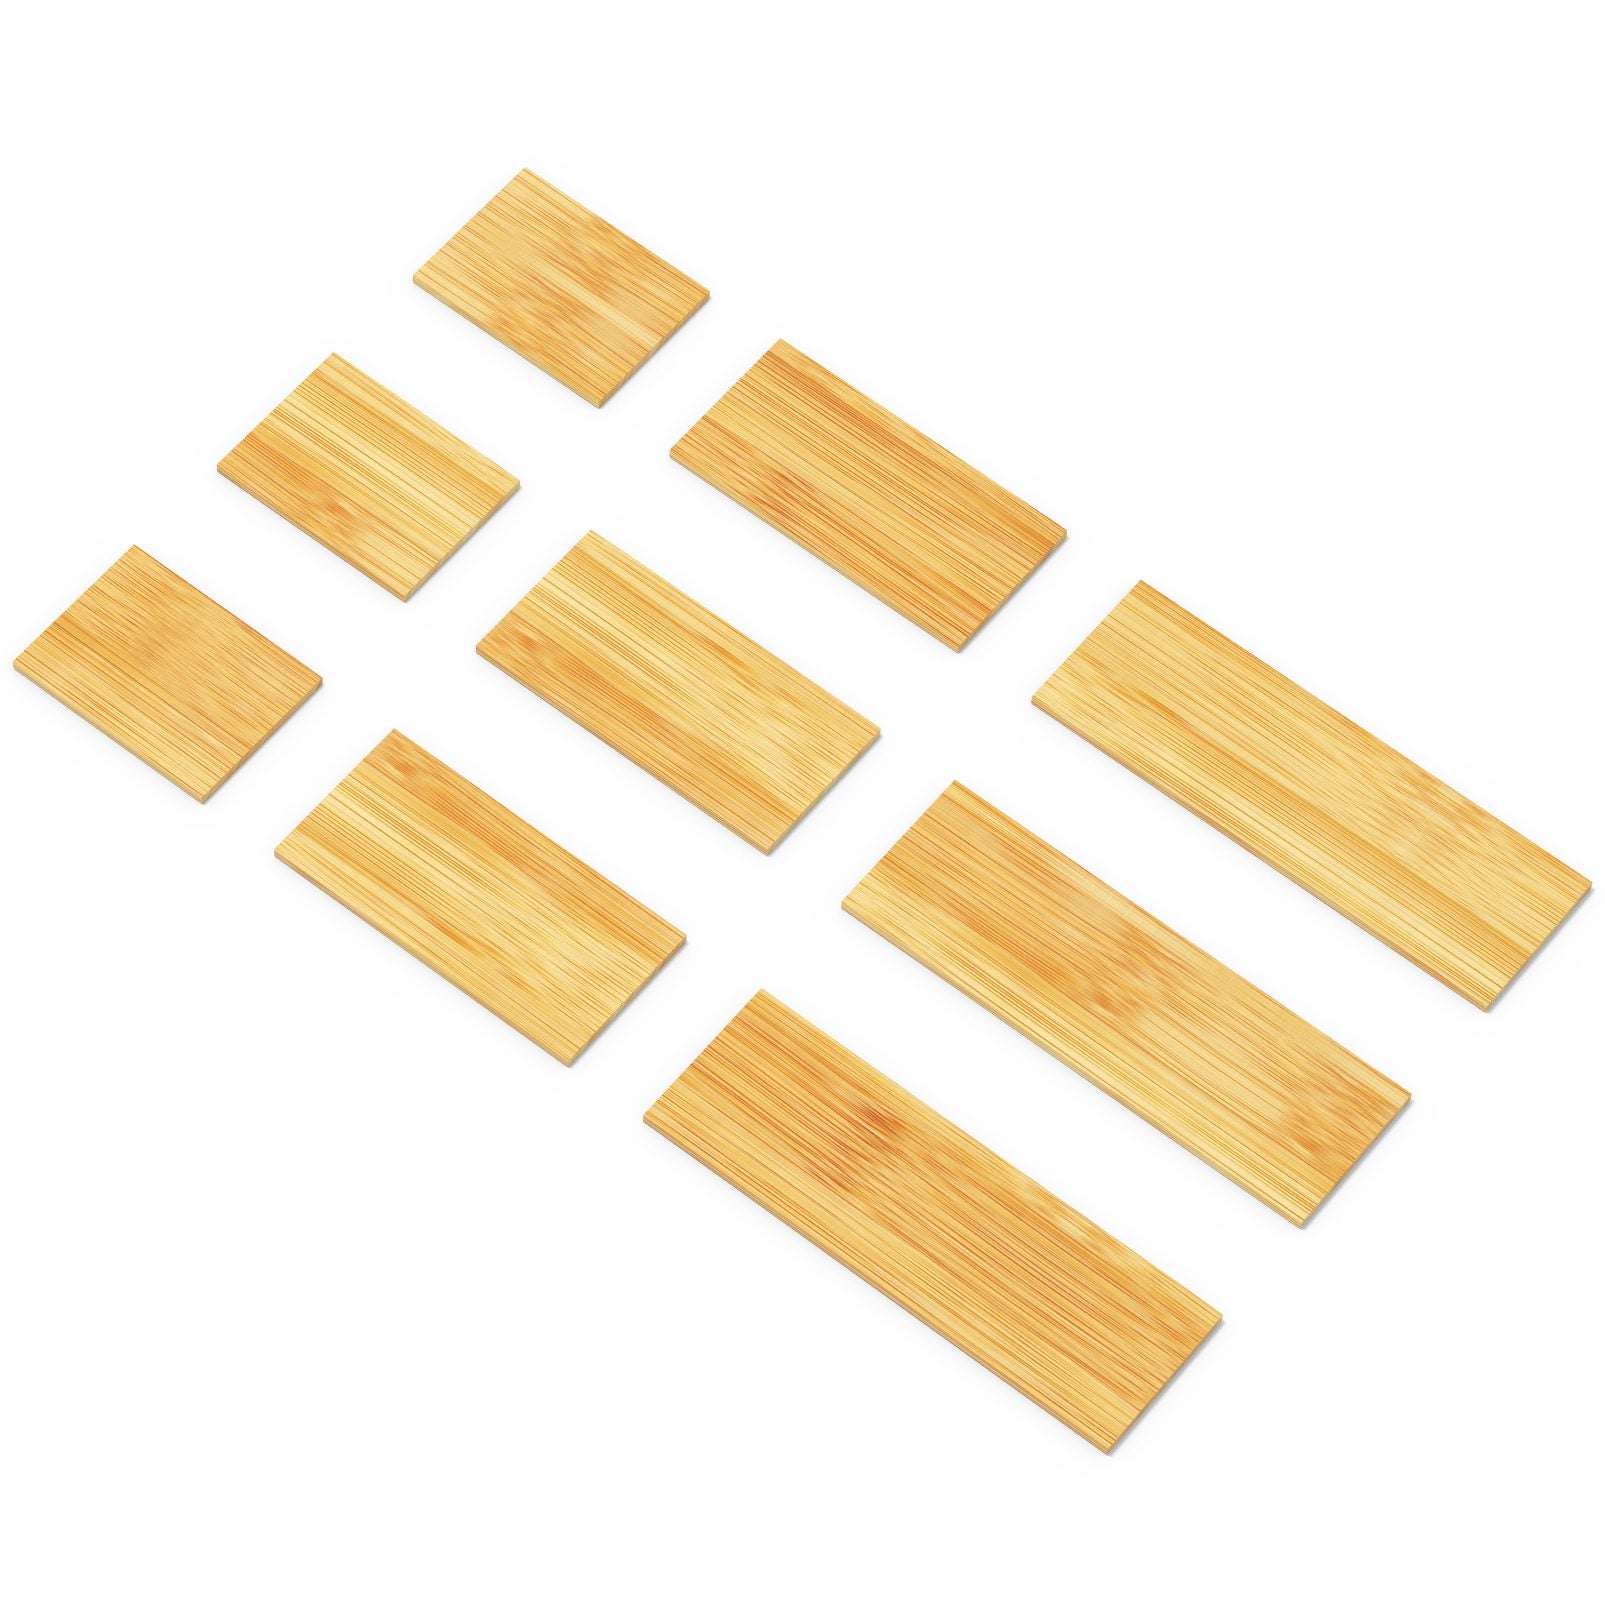 SpaceAid bamboo drawer divider inserts